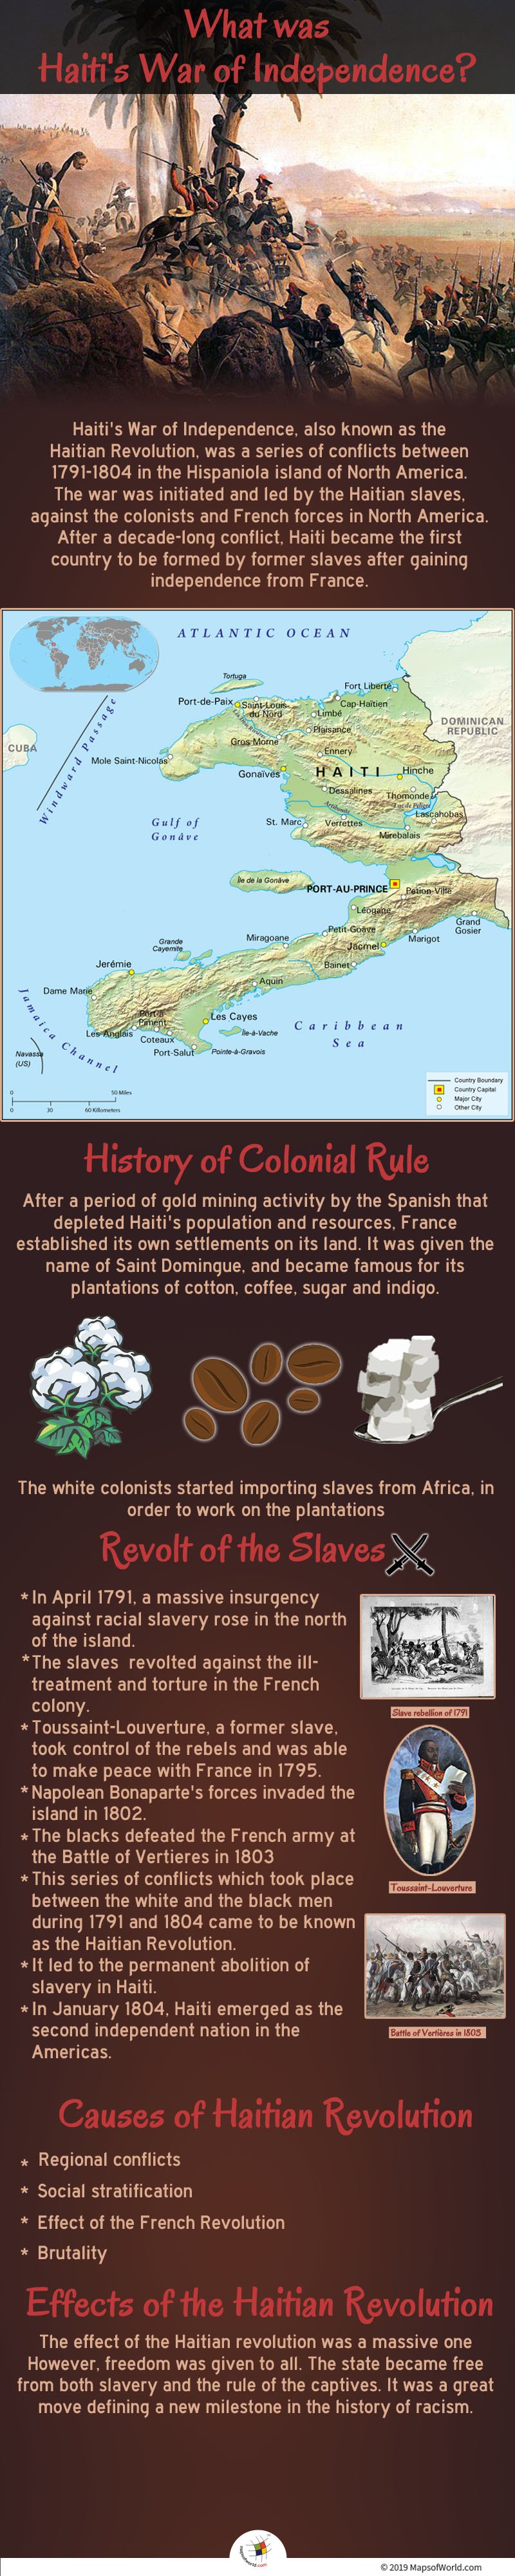 Infographic Showing Details on the Haiti’s War of Independence